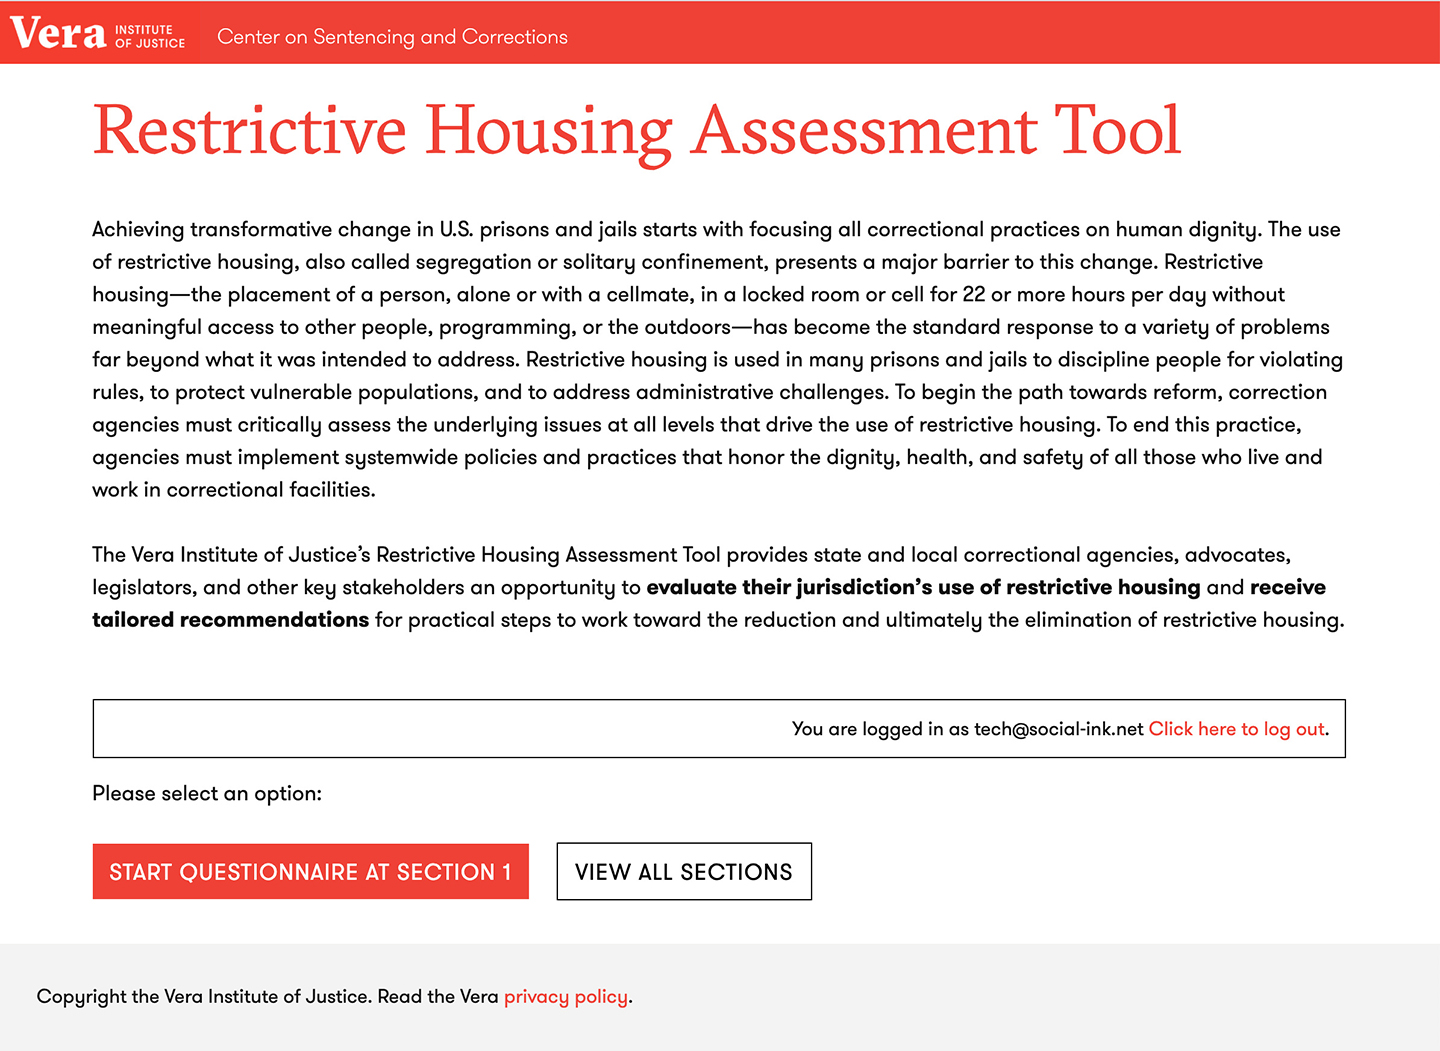 Restrictive Housing Assessment Tool from the Vera Institute of Justice: Restrictive Housing Assessment Tool - Home